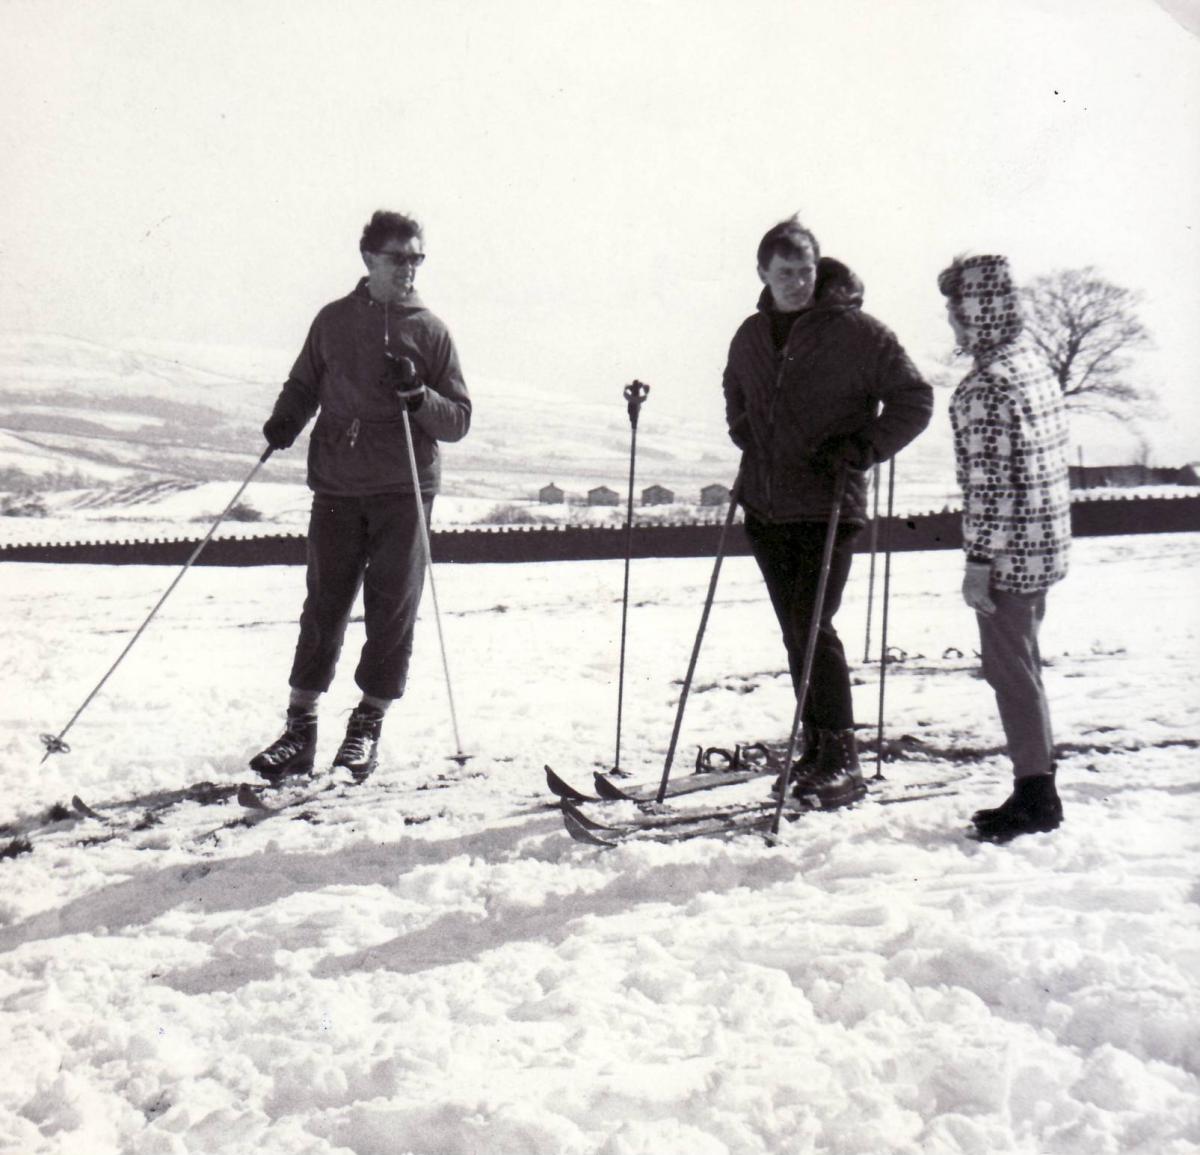 April 1966 - Winter weather hit Belmont in spring